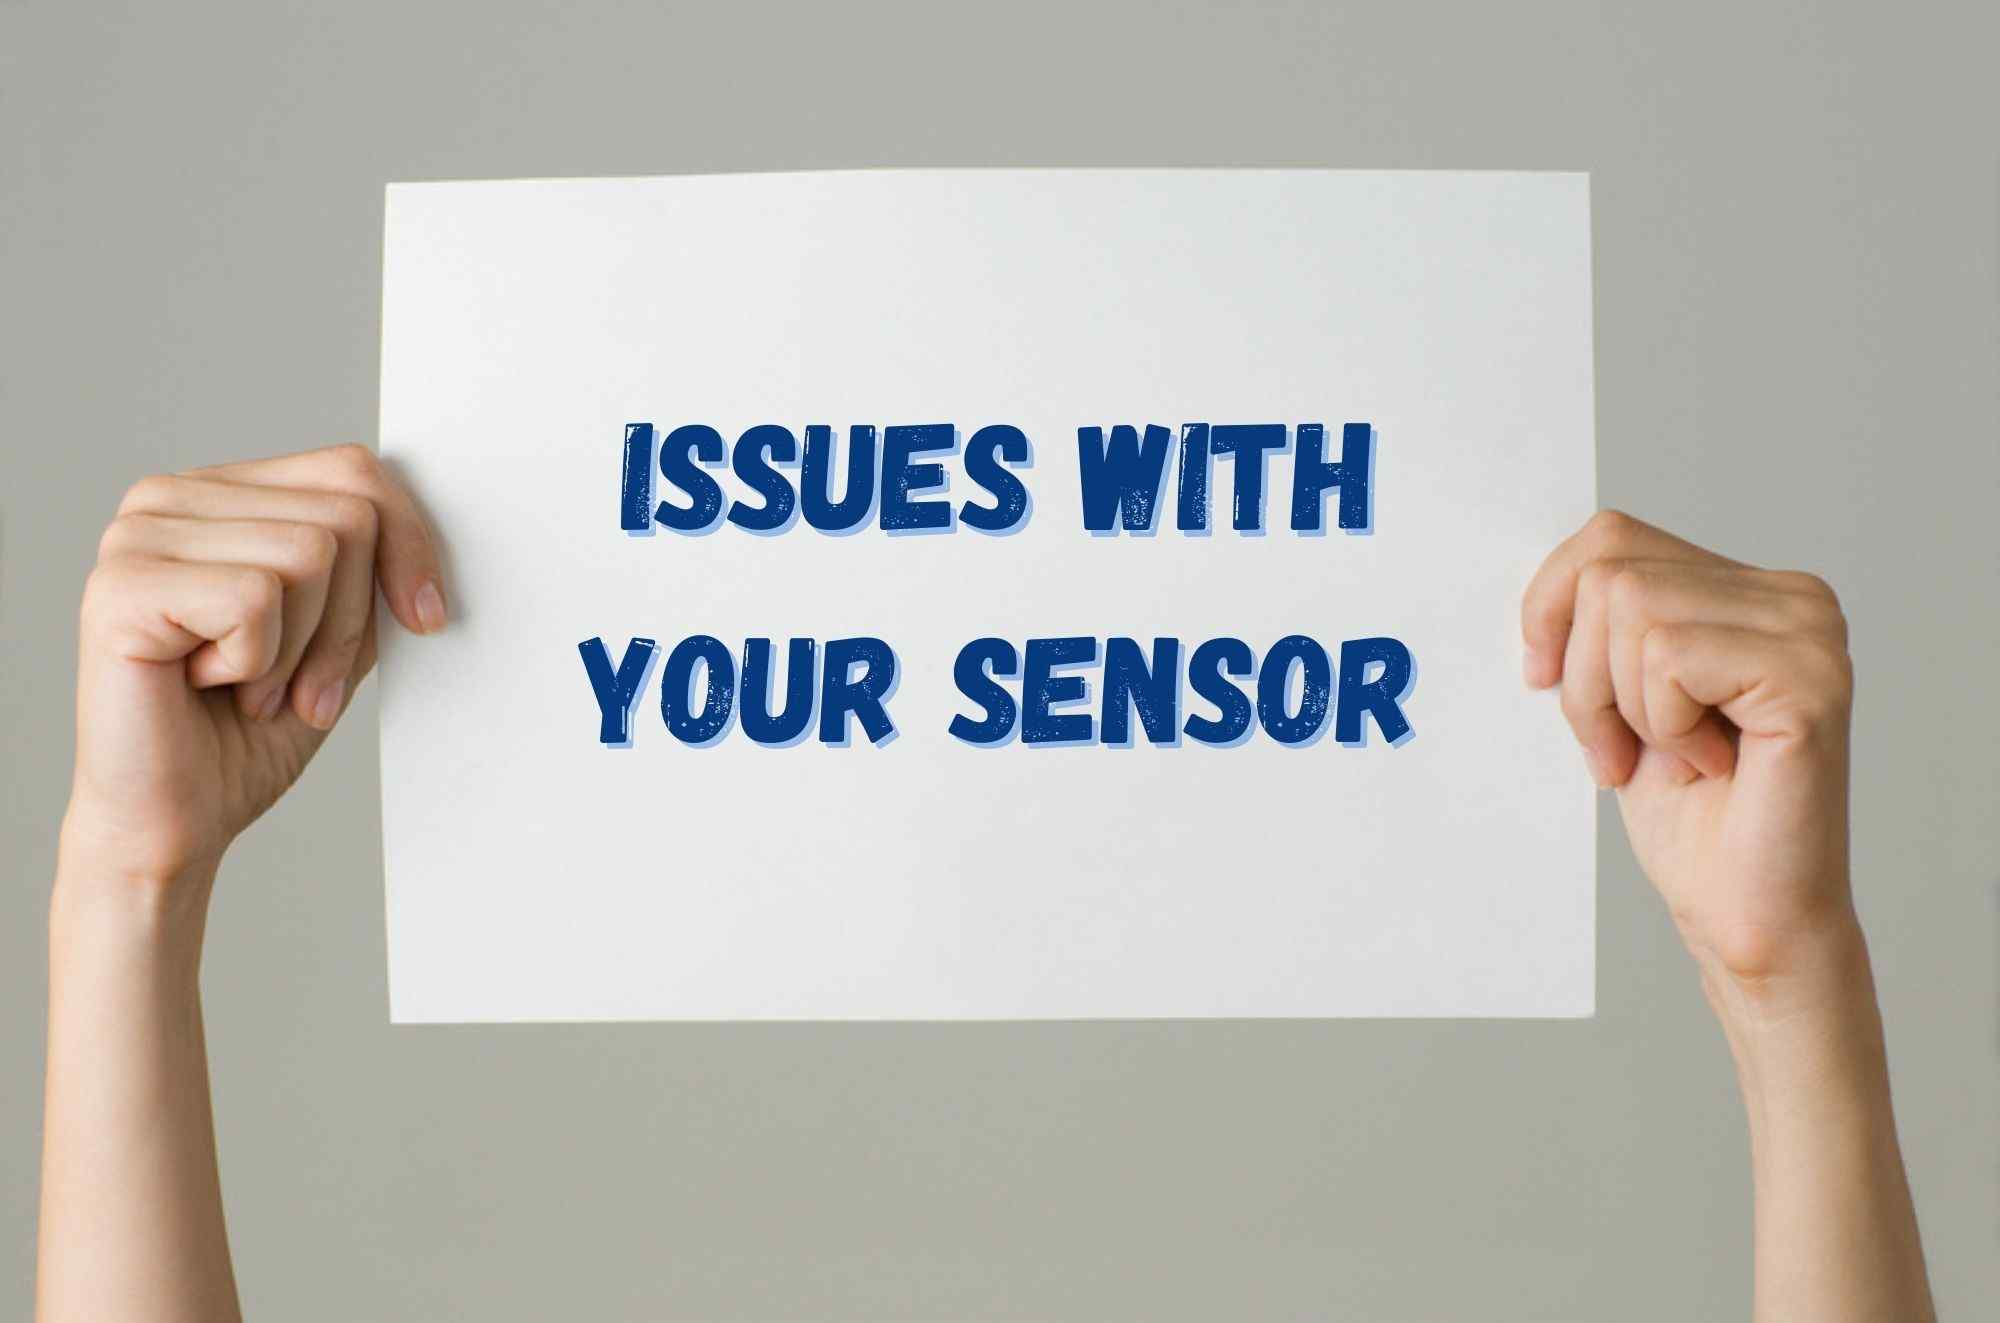 Issues with your sensor